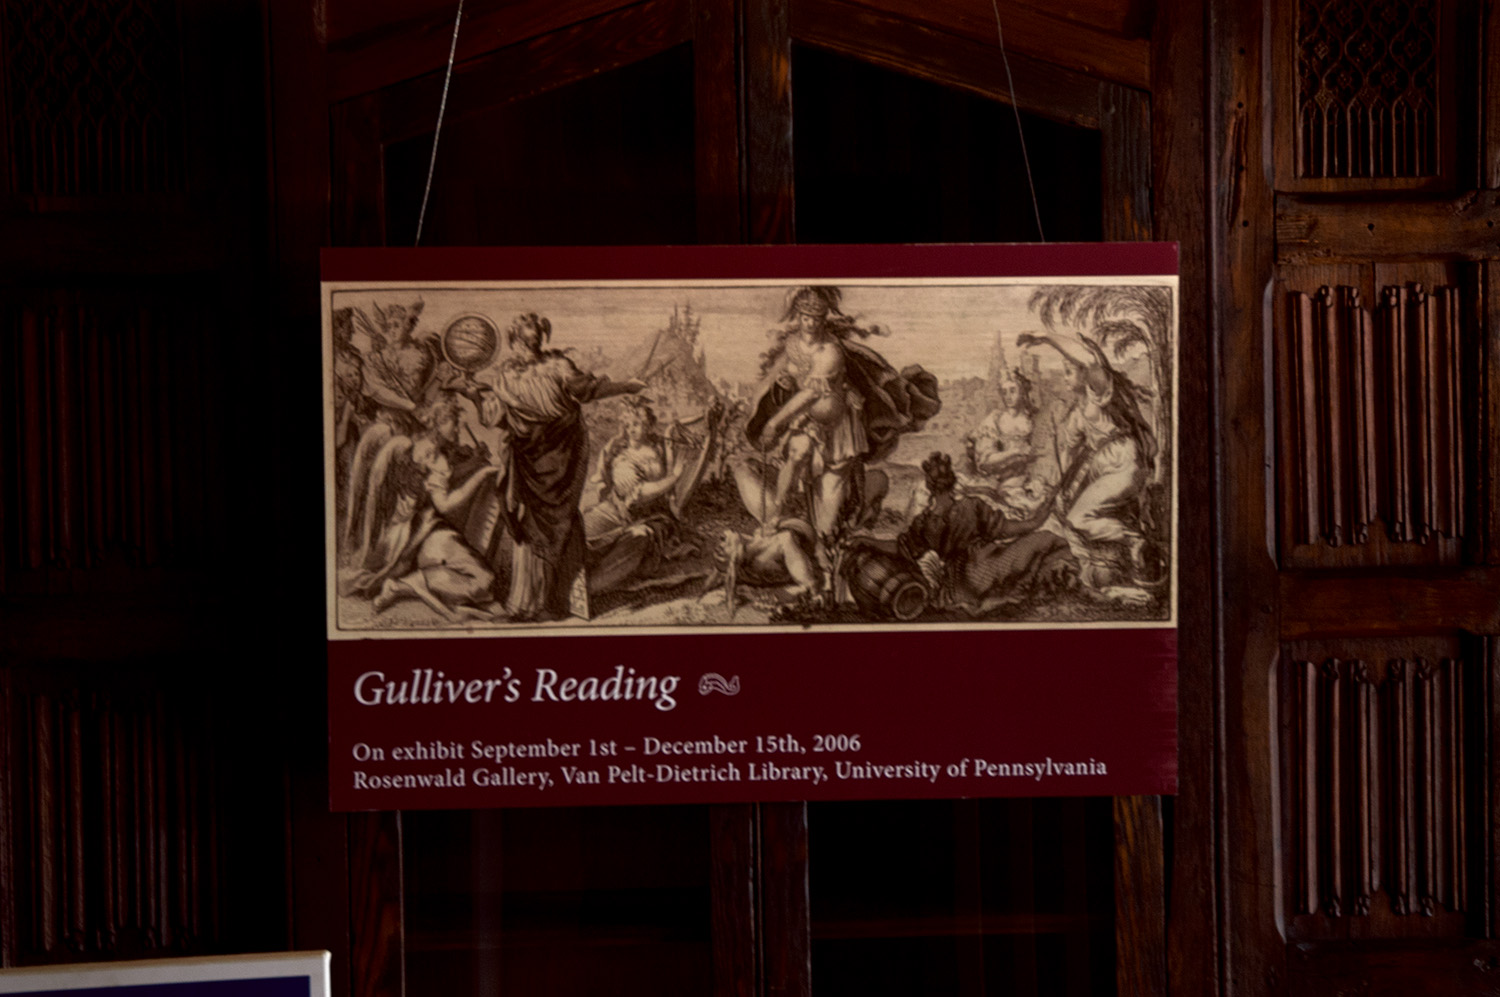 Gulliver's Reading exhibition poster